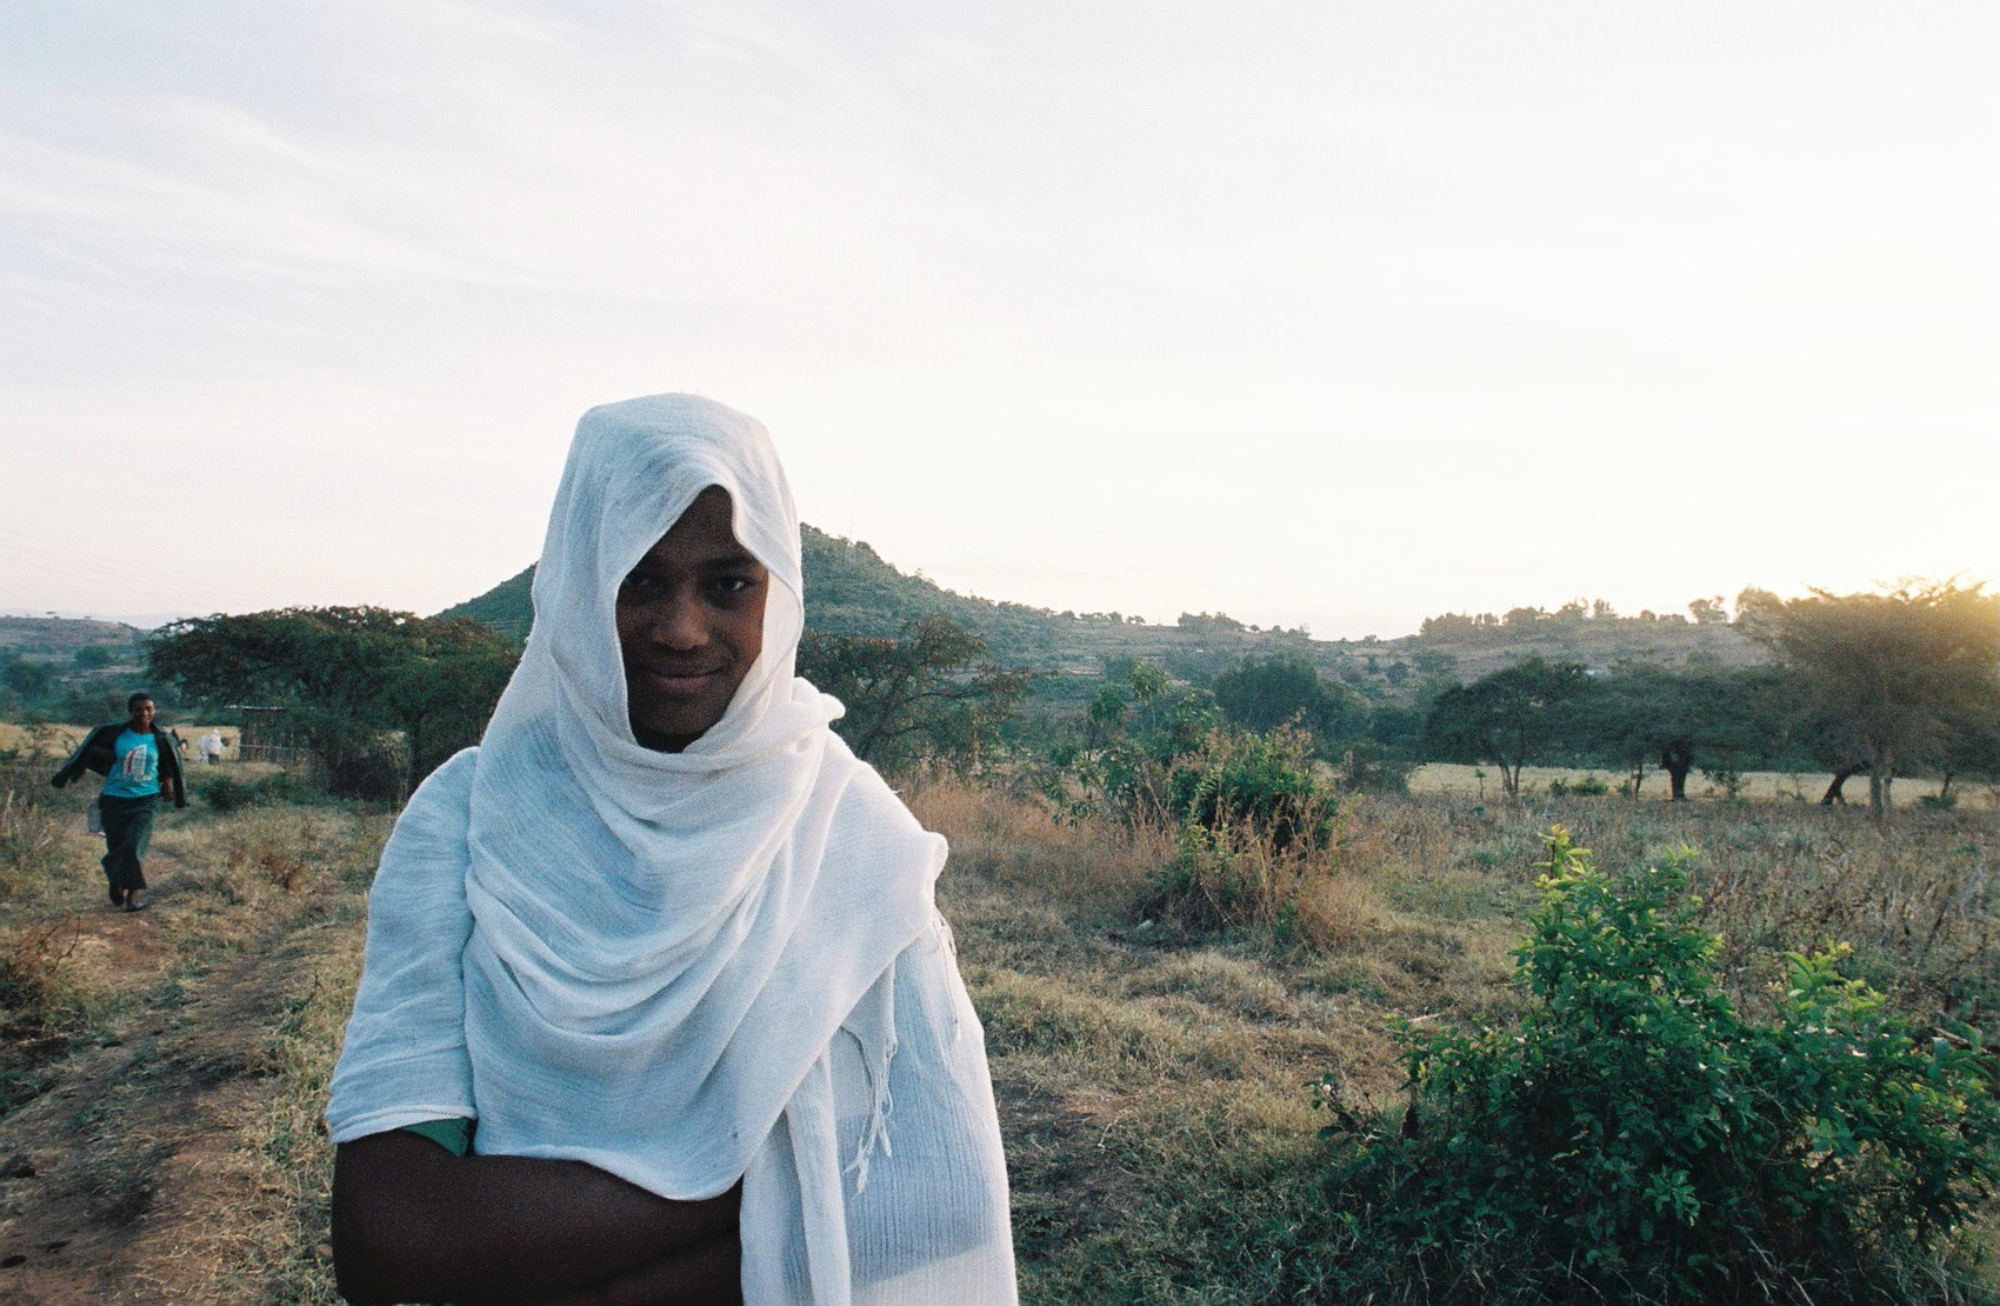  A young Ethiopian girl walking at dawn to school in the egalitarian community of Awra Amba. Founded in 1980 by Zumra Nuru, the community is home to over 450 residents and promotes gender equality. It remains controversial within religious communitie